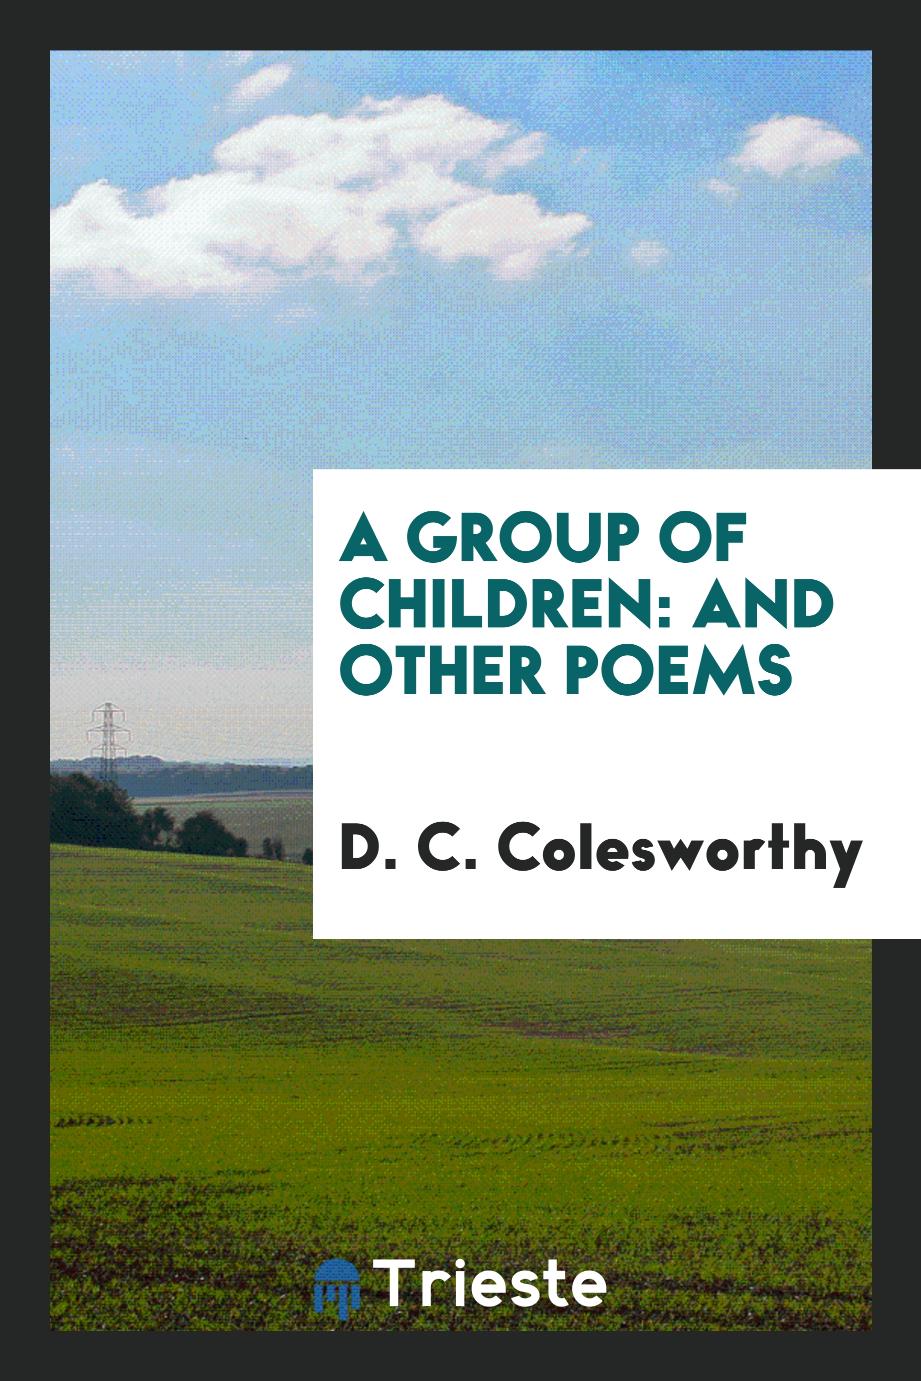 A group of children: and other poems